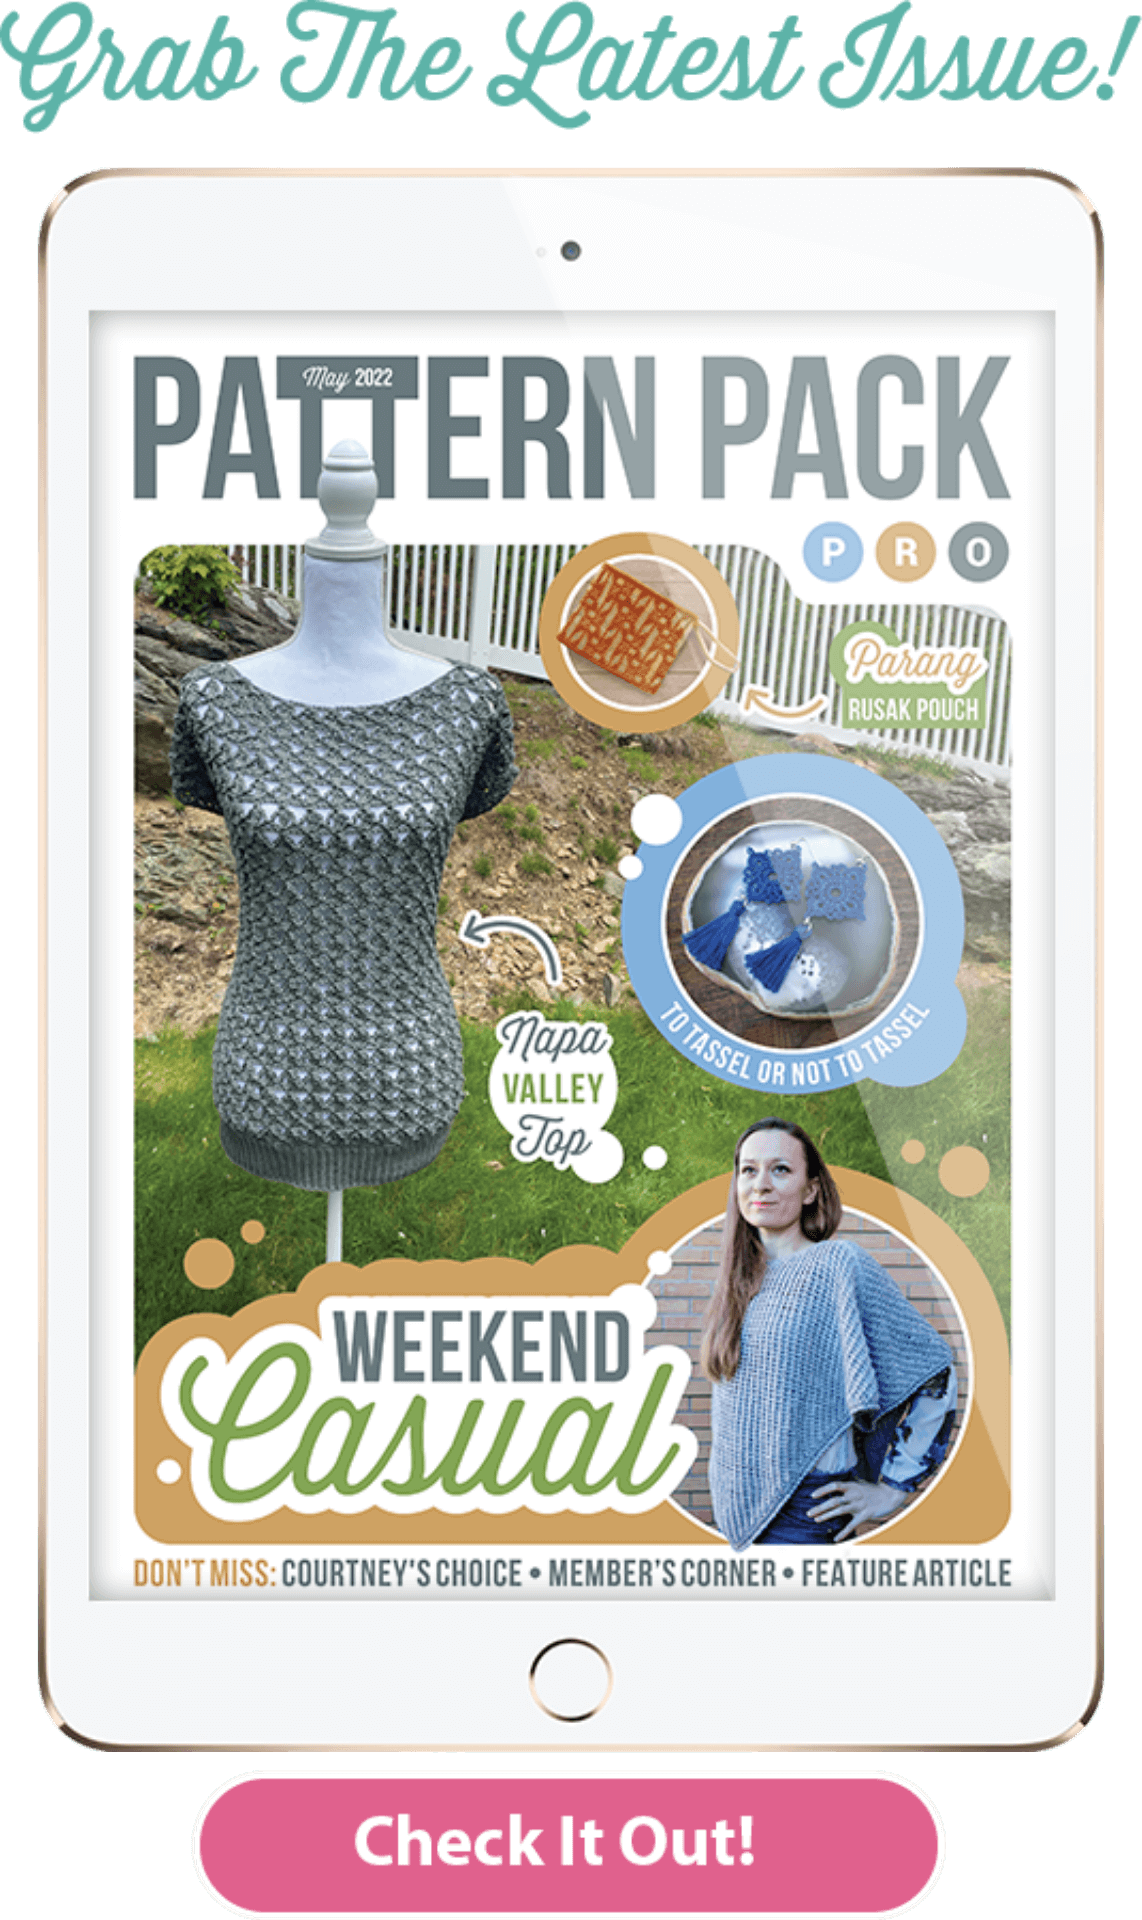 Weekend Casual Patterns are featured in the May 22 issue of Pattern Pack Pro! Check It Out!